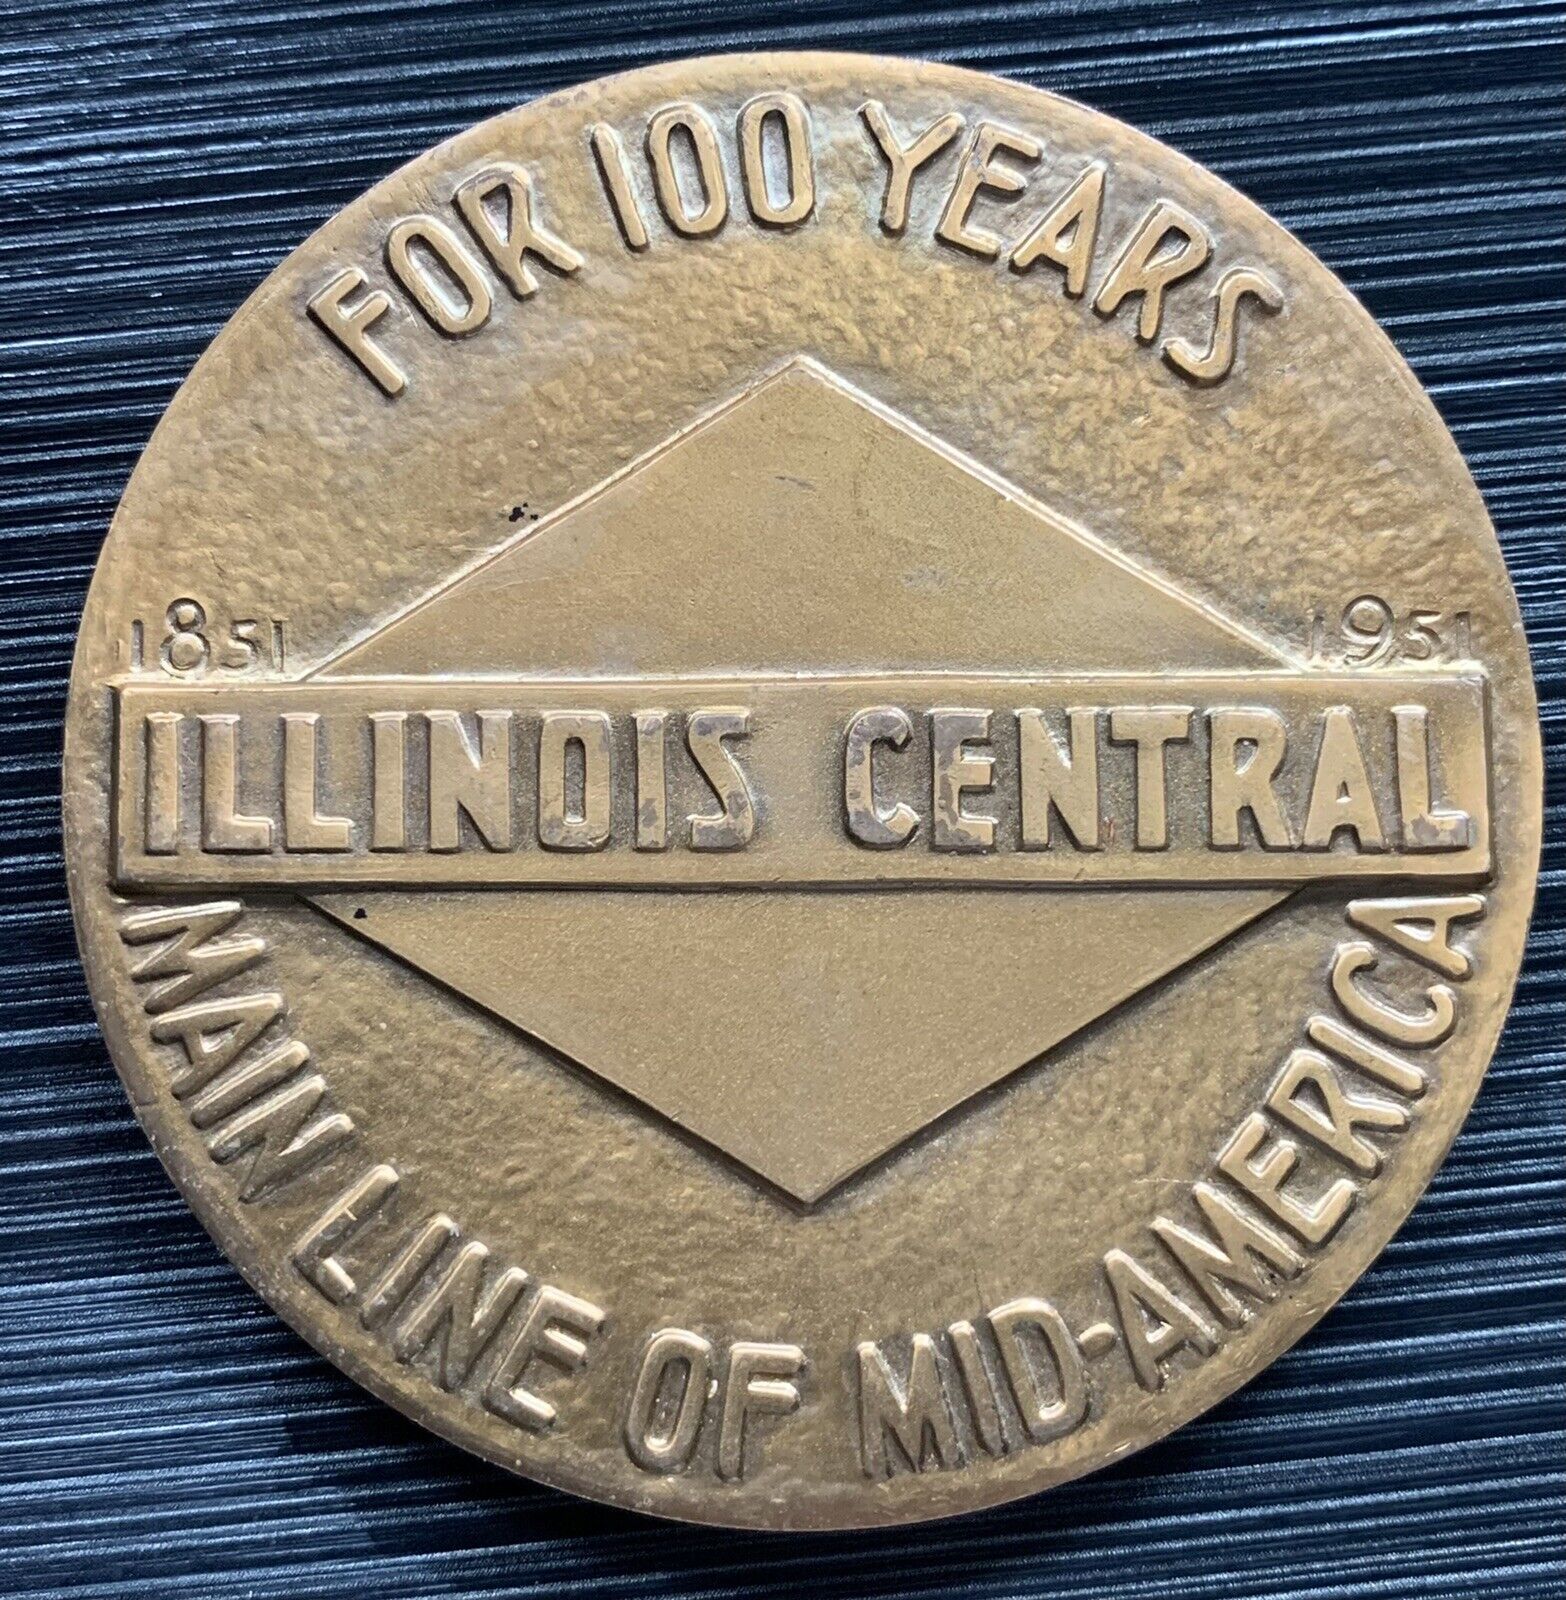 Primary image for 1951 Rare Bronze Medal For 100th Anniversary Of Illinois Central Main Line MidUS